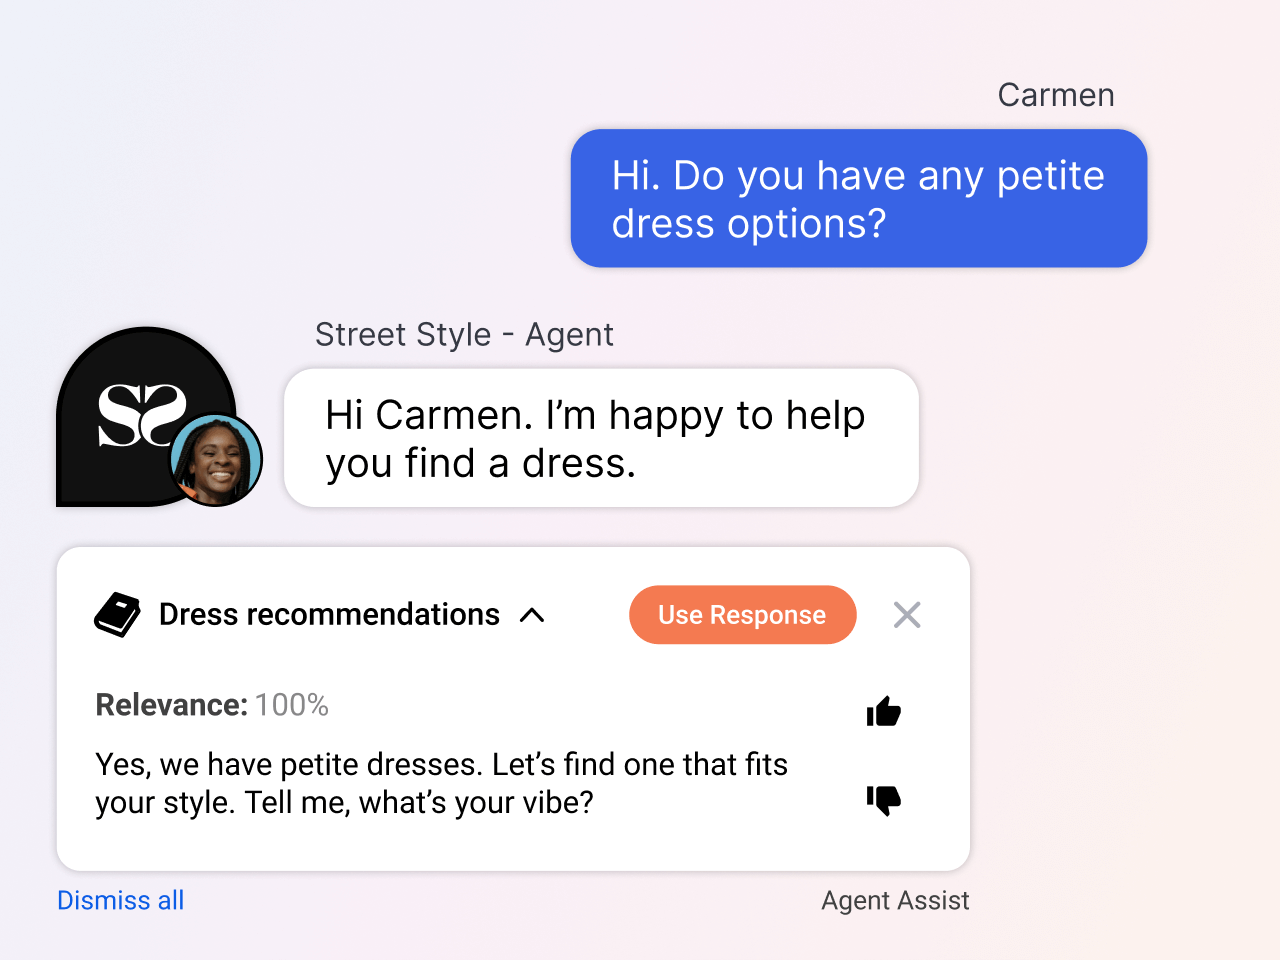 Example of how the best conversational AI platform solves customer problems, like creating virtual assistants as style guides for online shopping